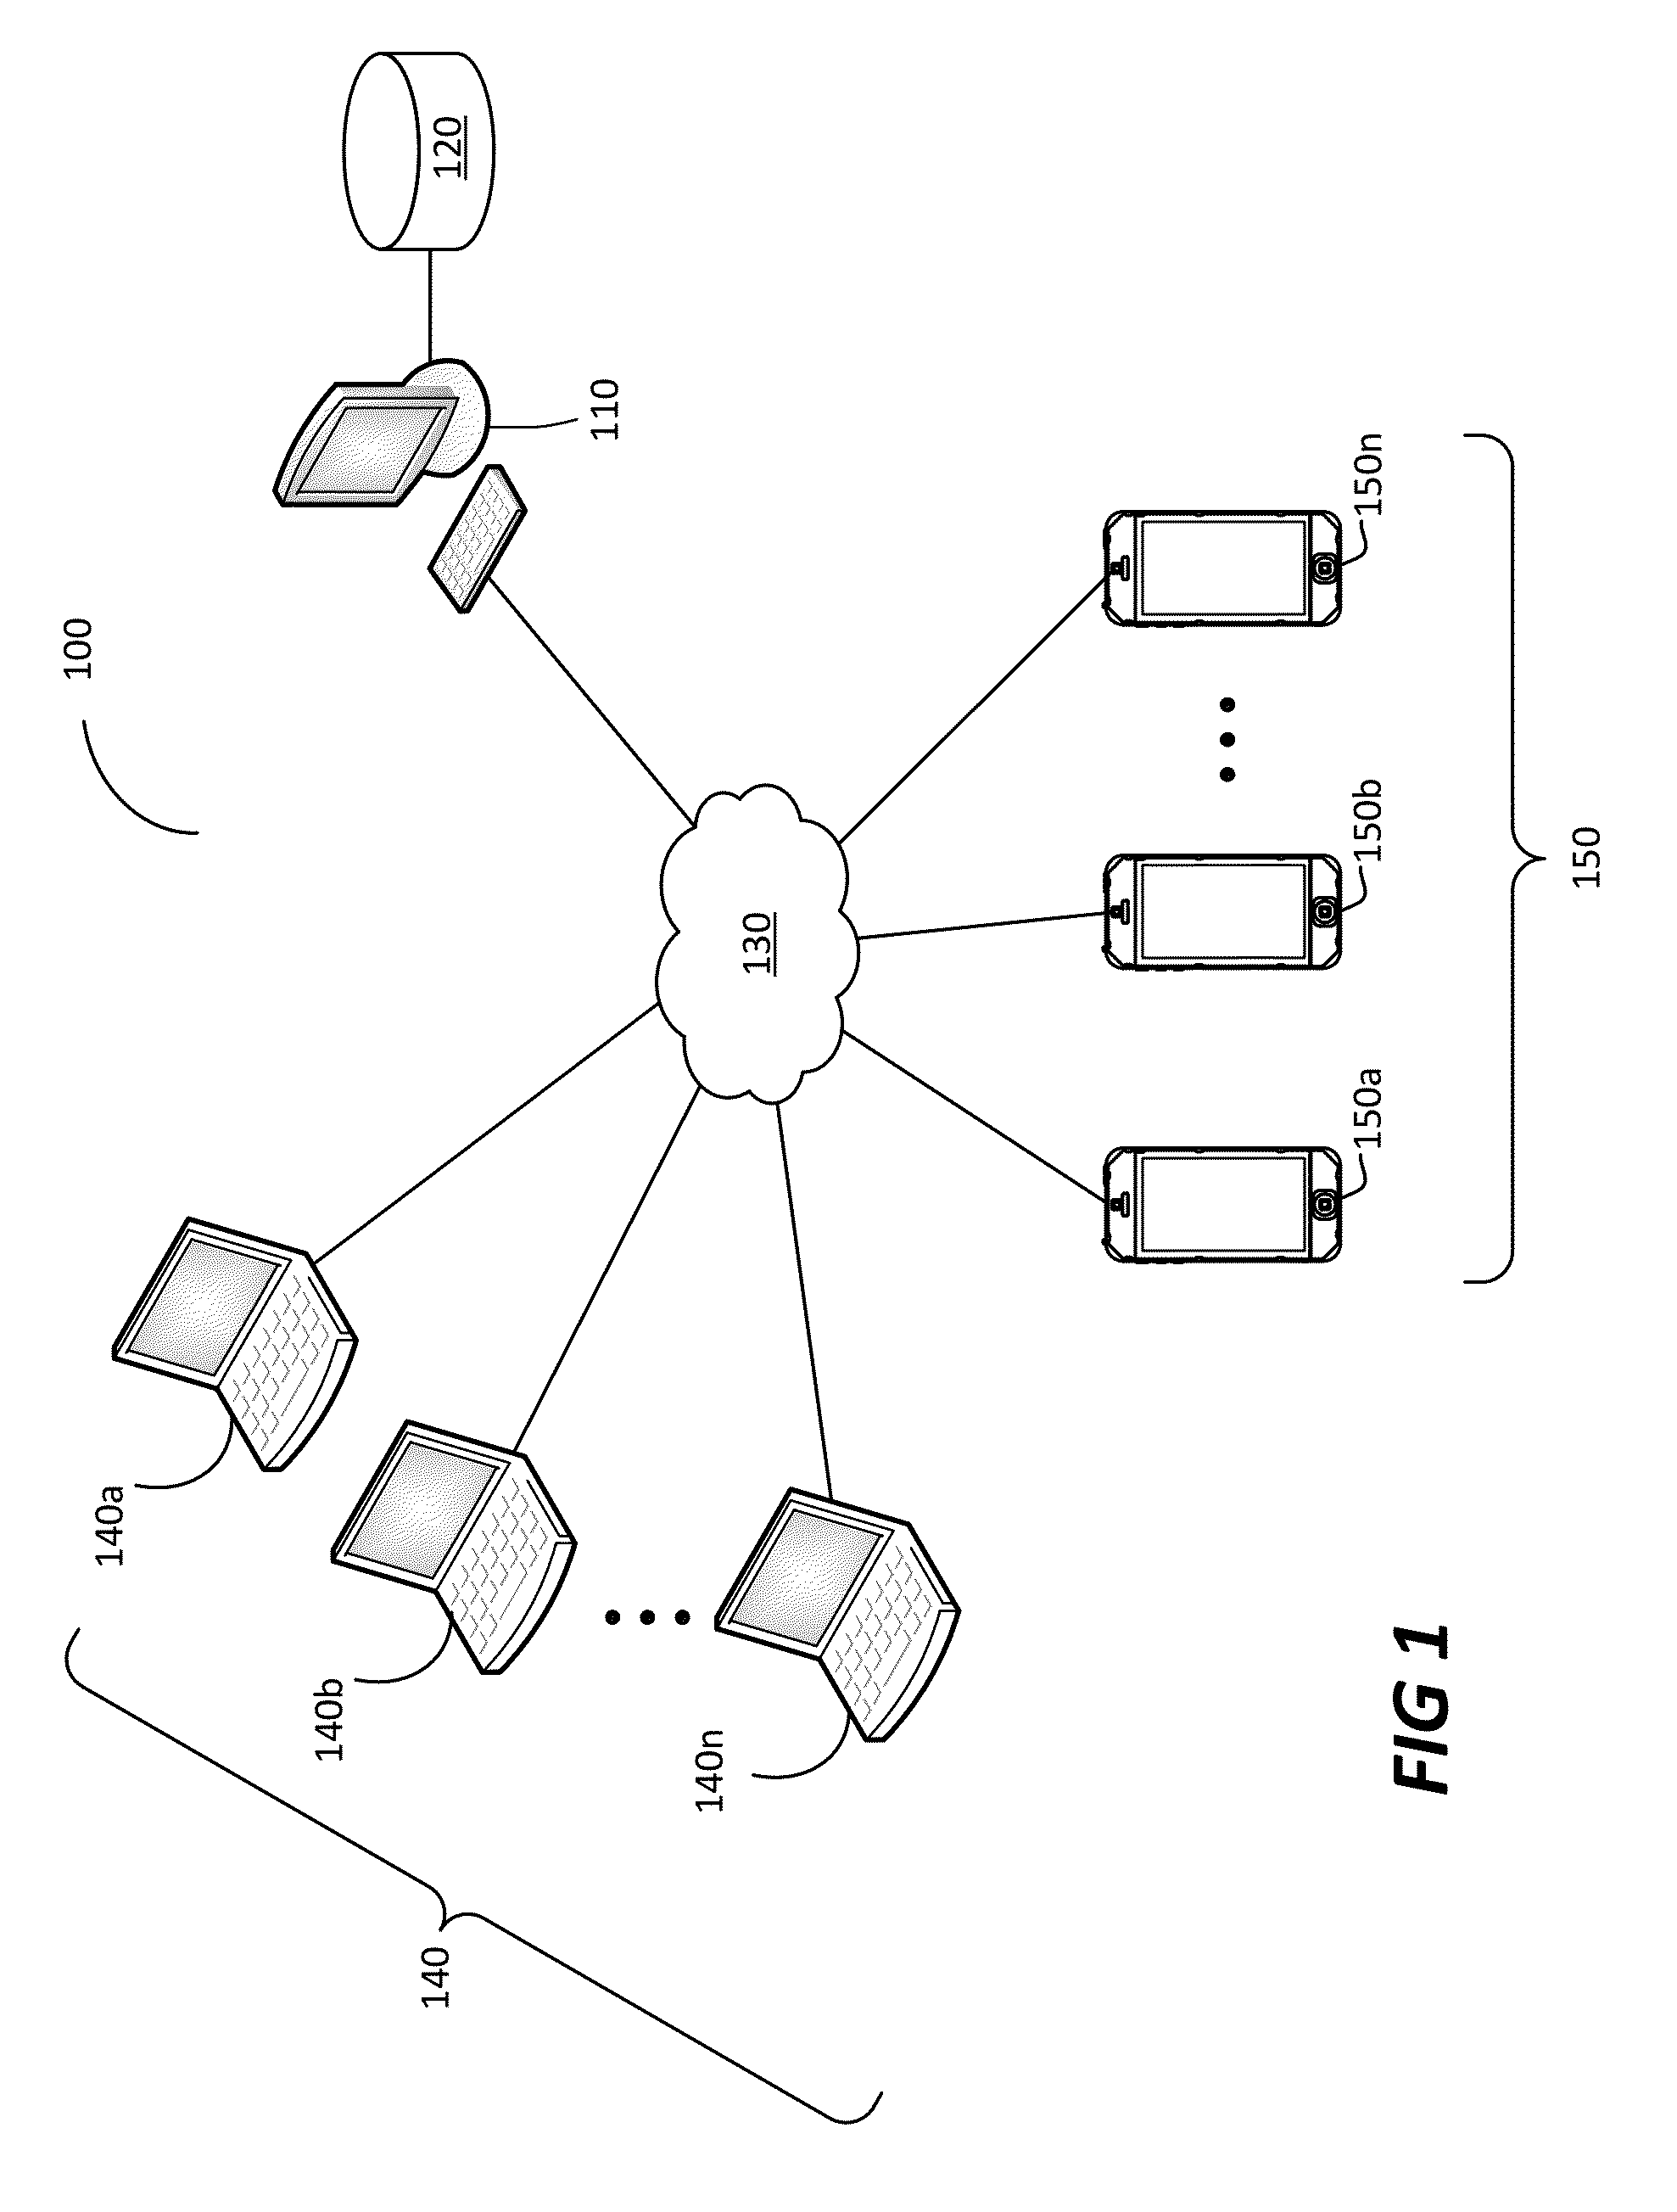 Event and staff management systems and methods